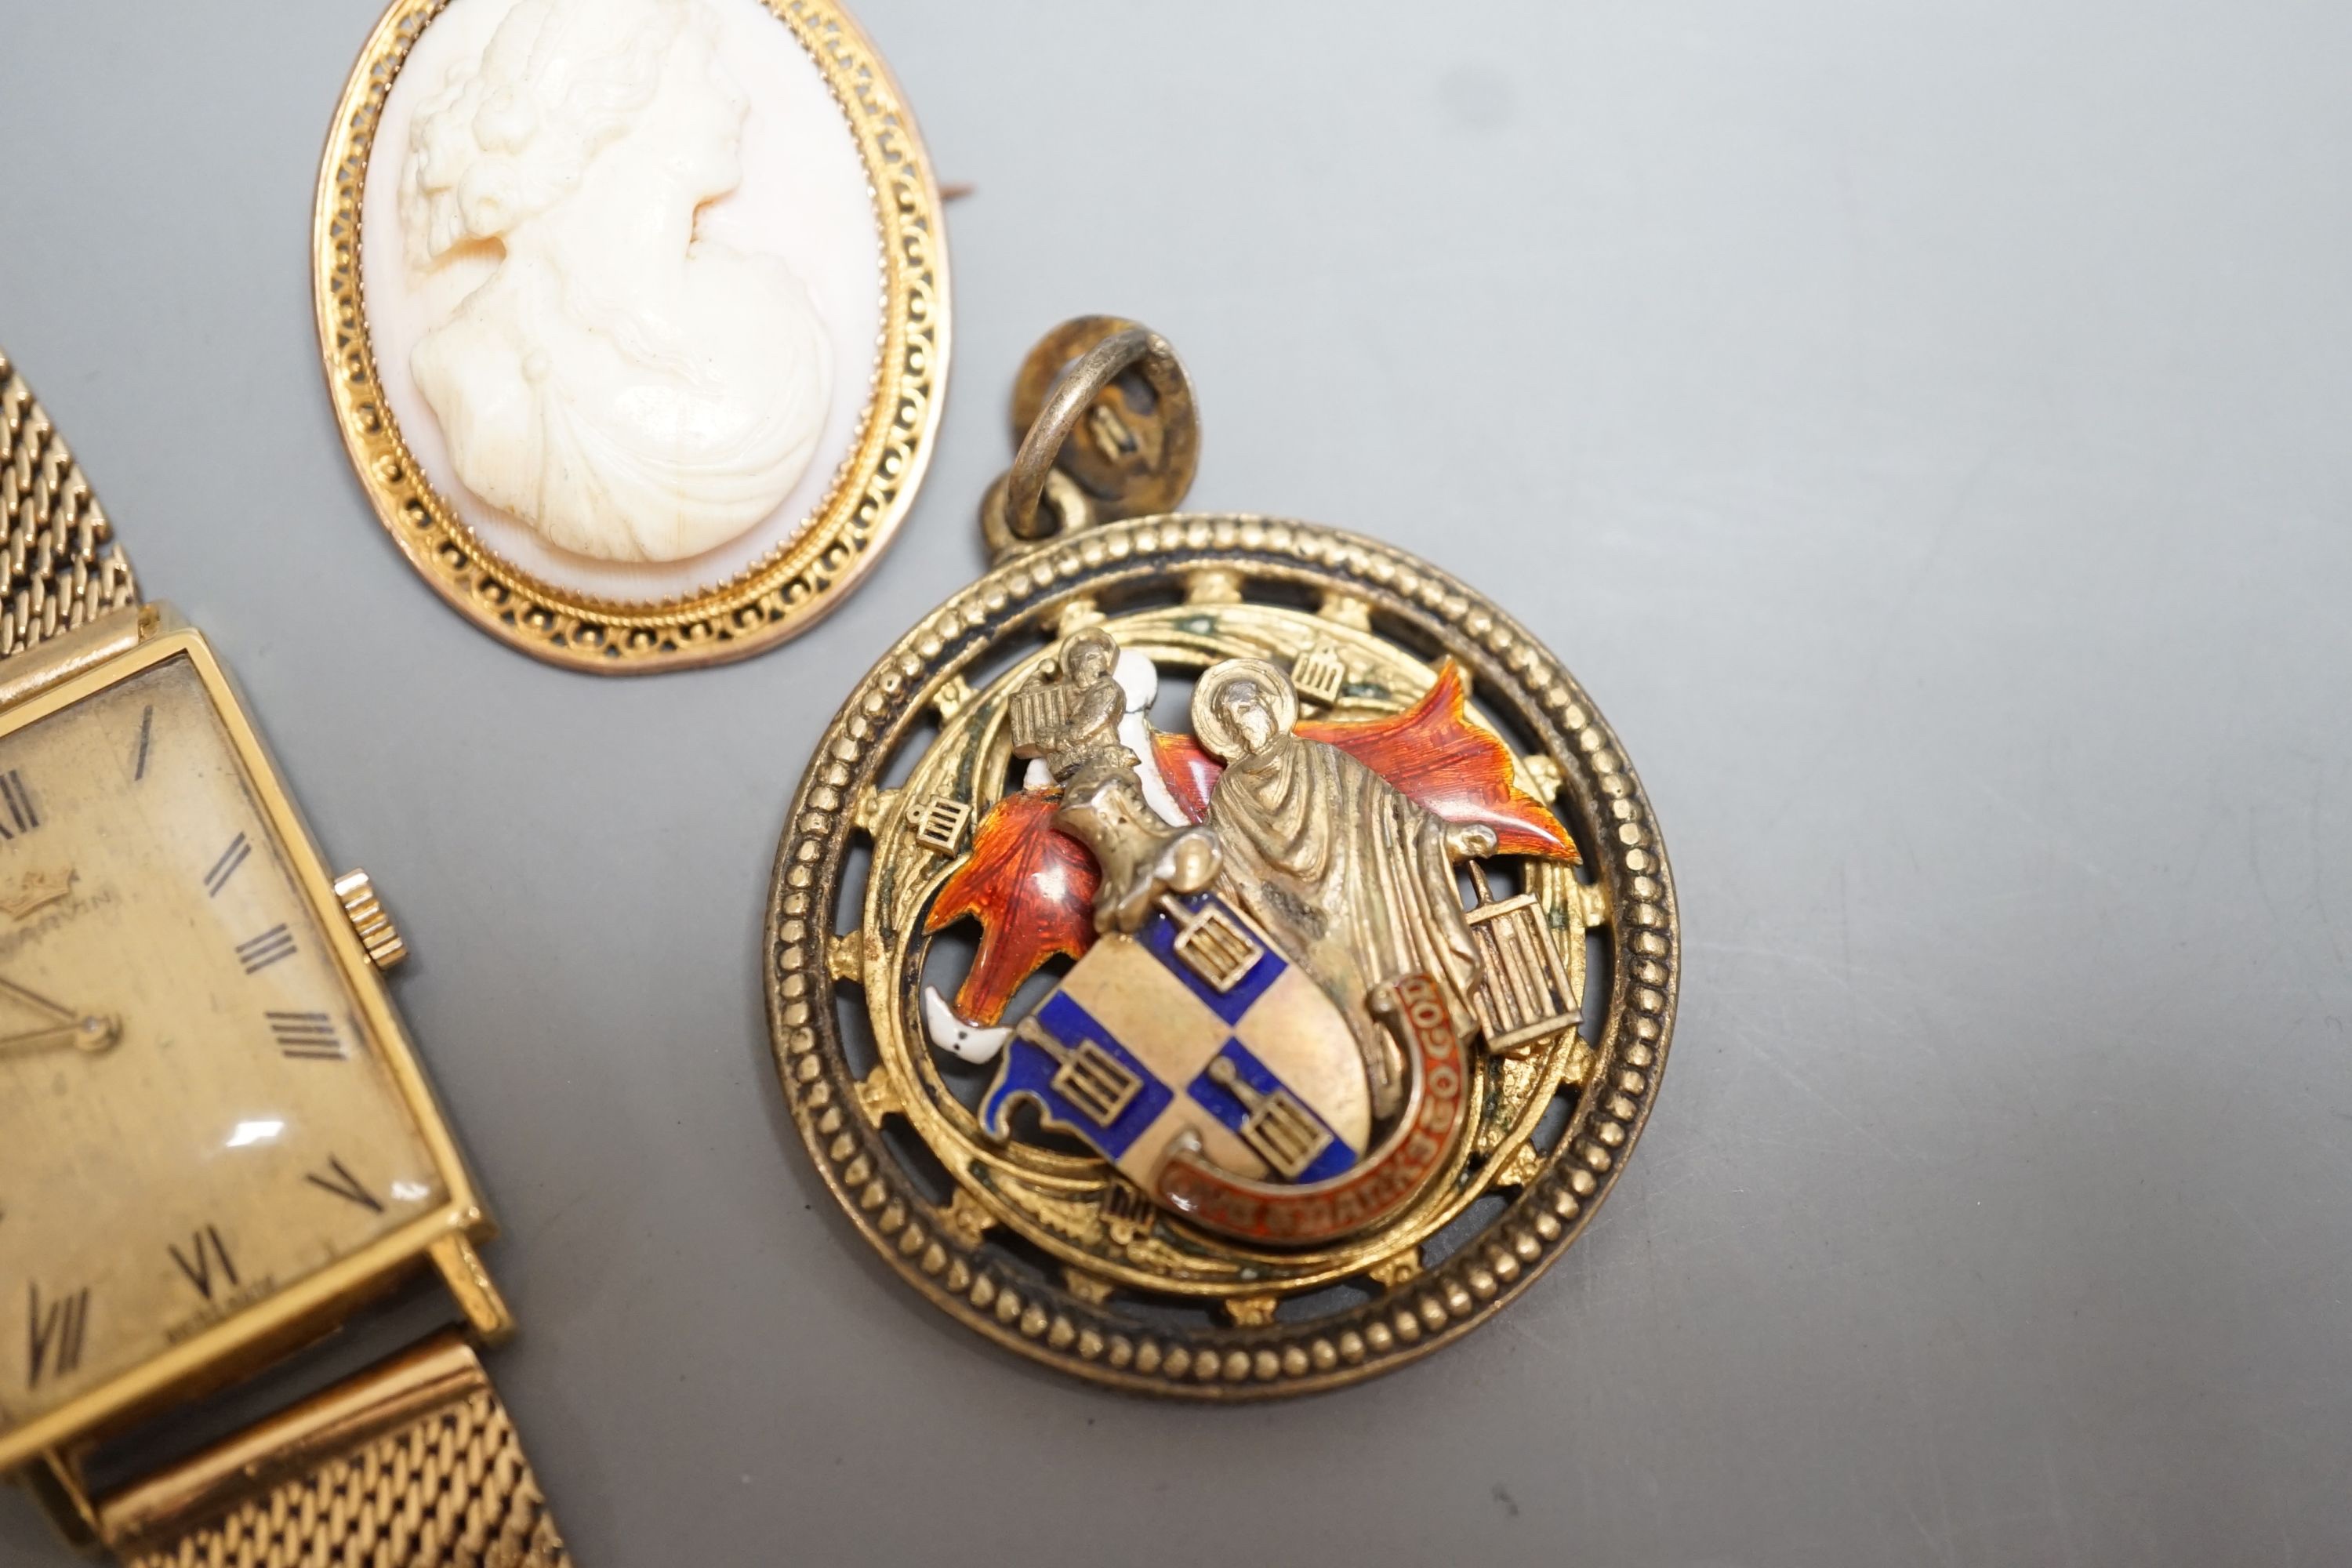 A gentleman's 18ct Marvin manual wind wrist watch, on a 9ct gold bracelet, gross 38.4 grams, a 9ct mounted oval cameo brooch cameo brooch and an enamelled gilt metal medallion.